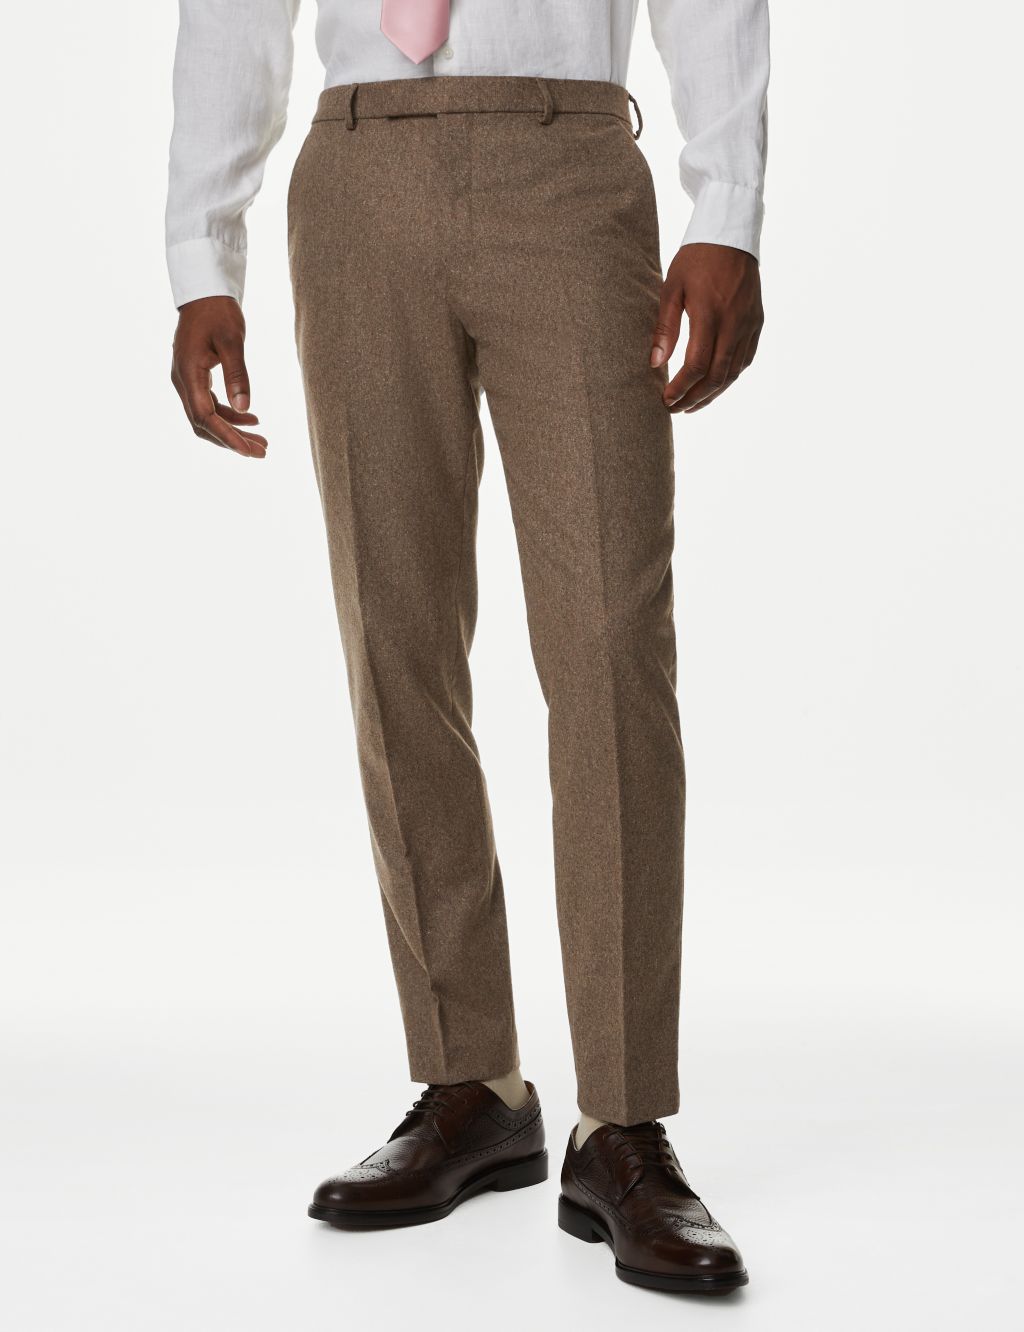 Tailored Fit Wool Rich Donegal Suit Trousers image 3